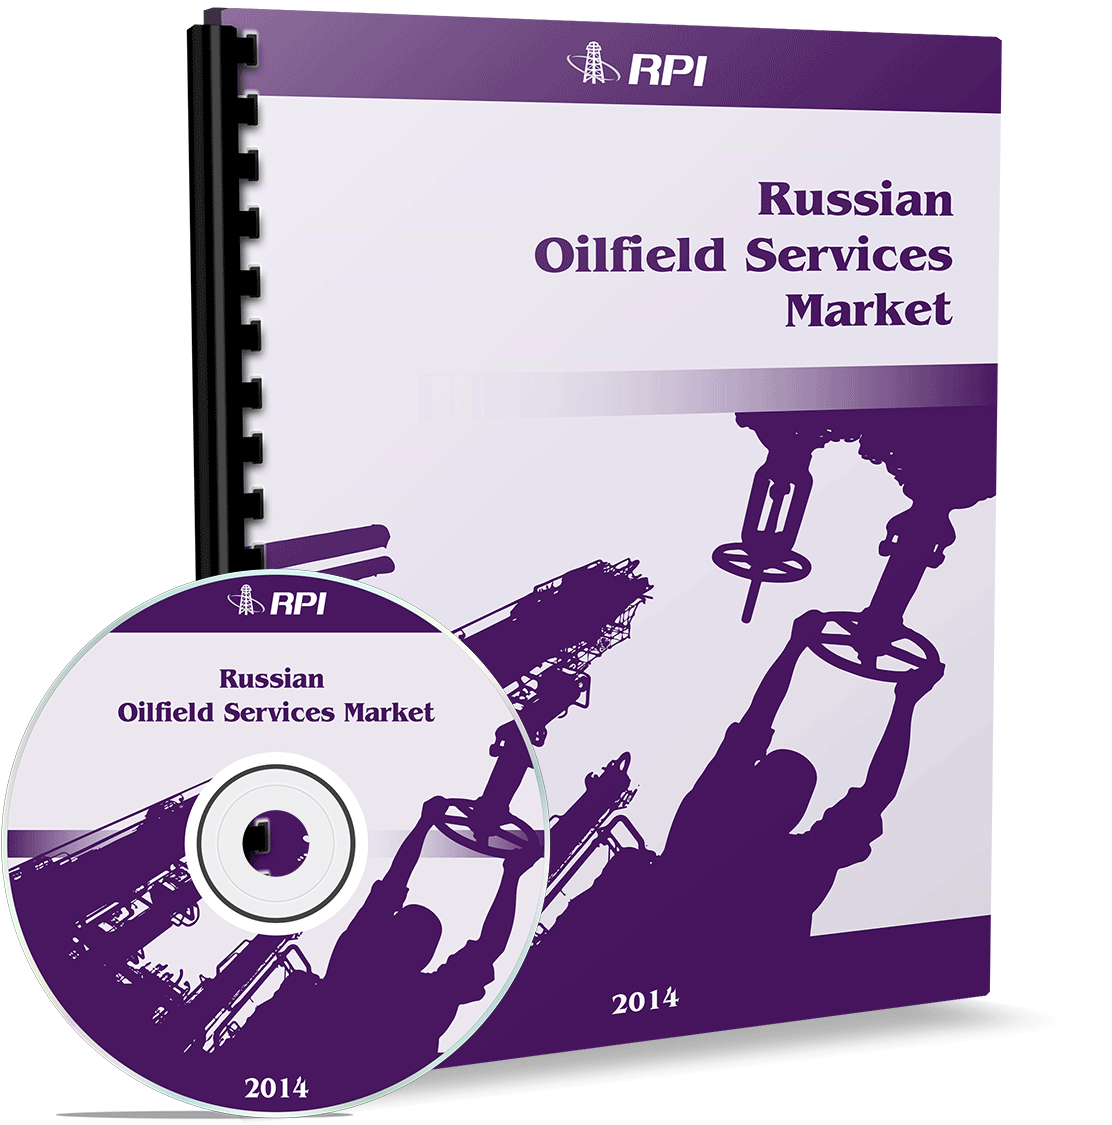 The Russian Oilfield Services Market Amid Current Challenges in the Prevailing Geopolitical Environment